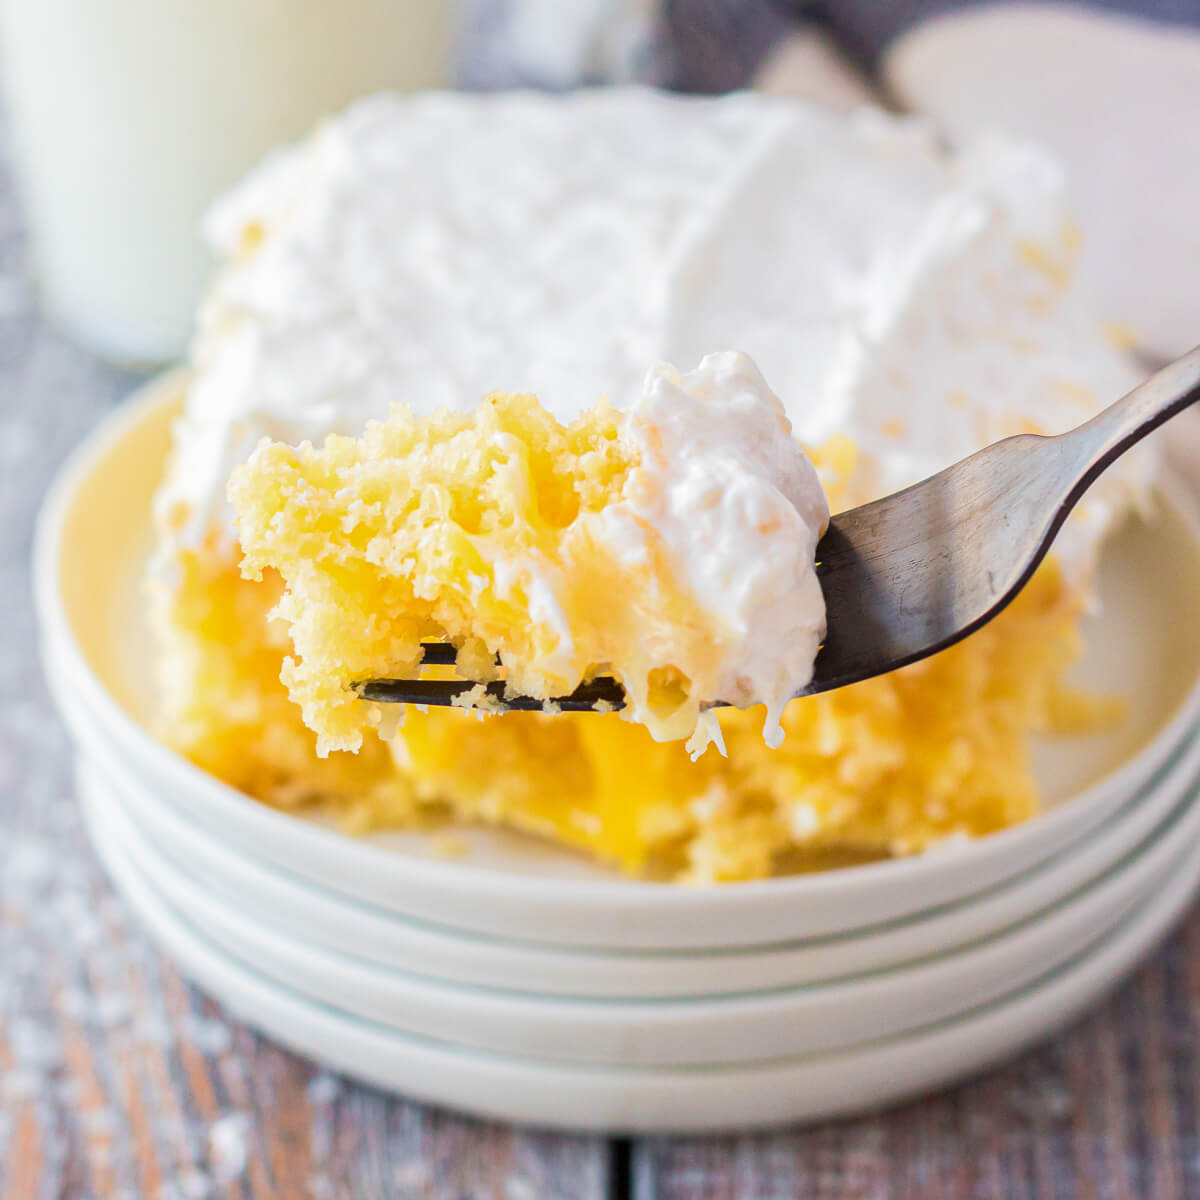 A fork holds a bite of cake in front of a square of dreamy Pineapple Poke Cake with creamy whipped topping on a stack of white plates.